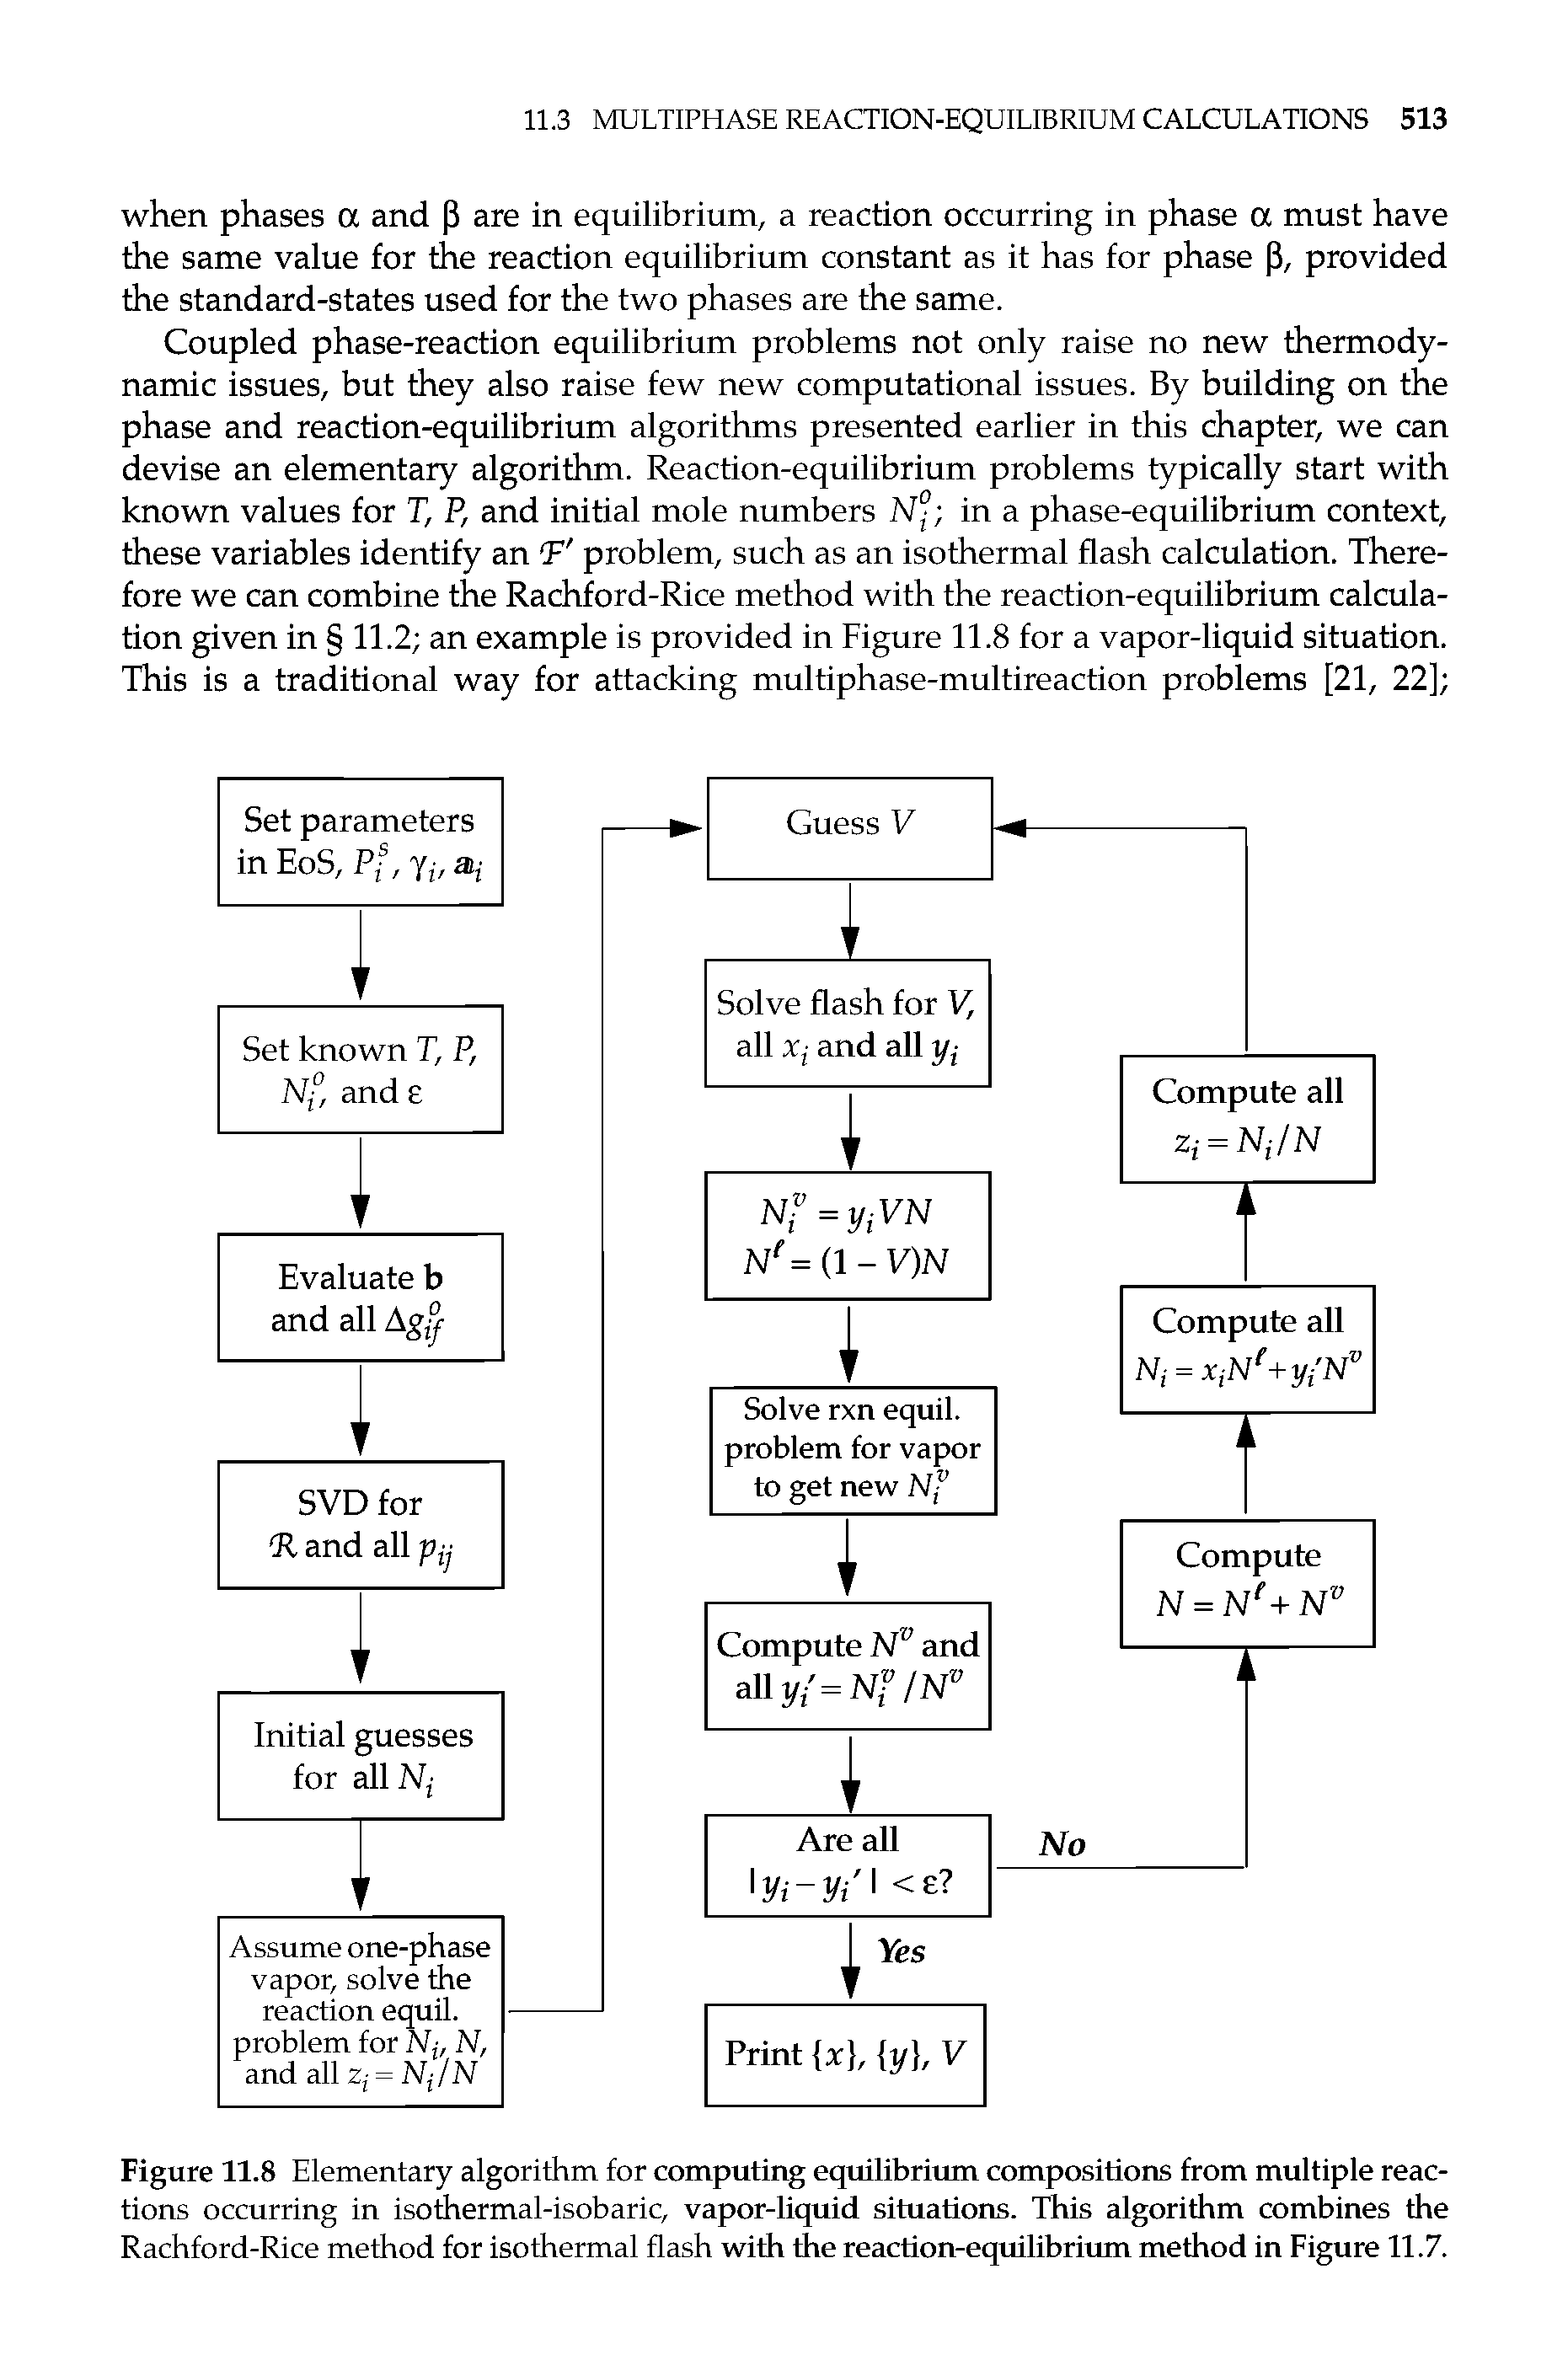 Figure 11.8 Elementary algorithm for computing equilibrium compositions from multiple reactions occurring in isothermal-isobaric, vapor-Uquid situations. This algorithm combines the Rachford-Rice method for isothermal flash with the reaction-equilibrium method in Figure 11.7.